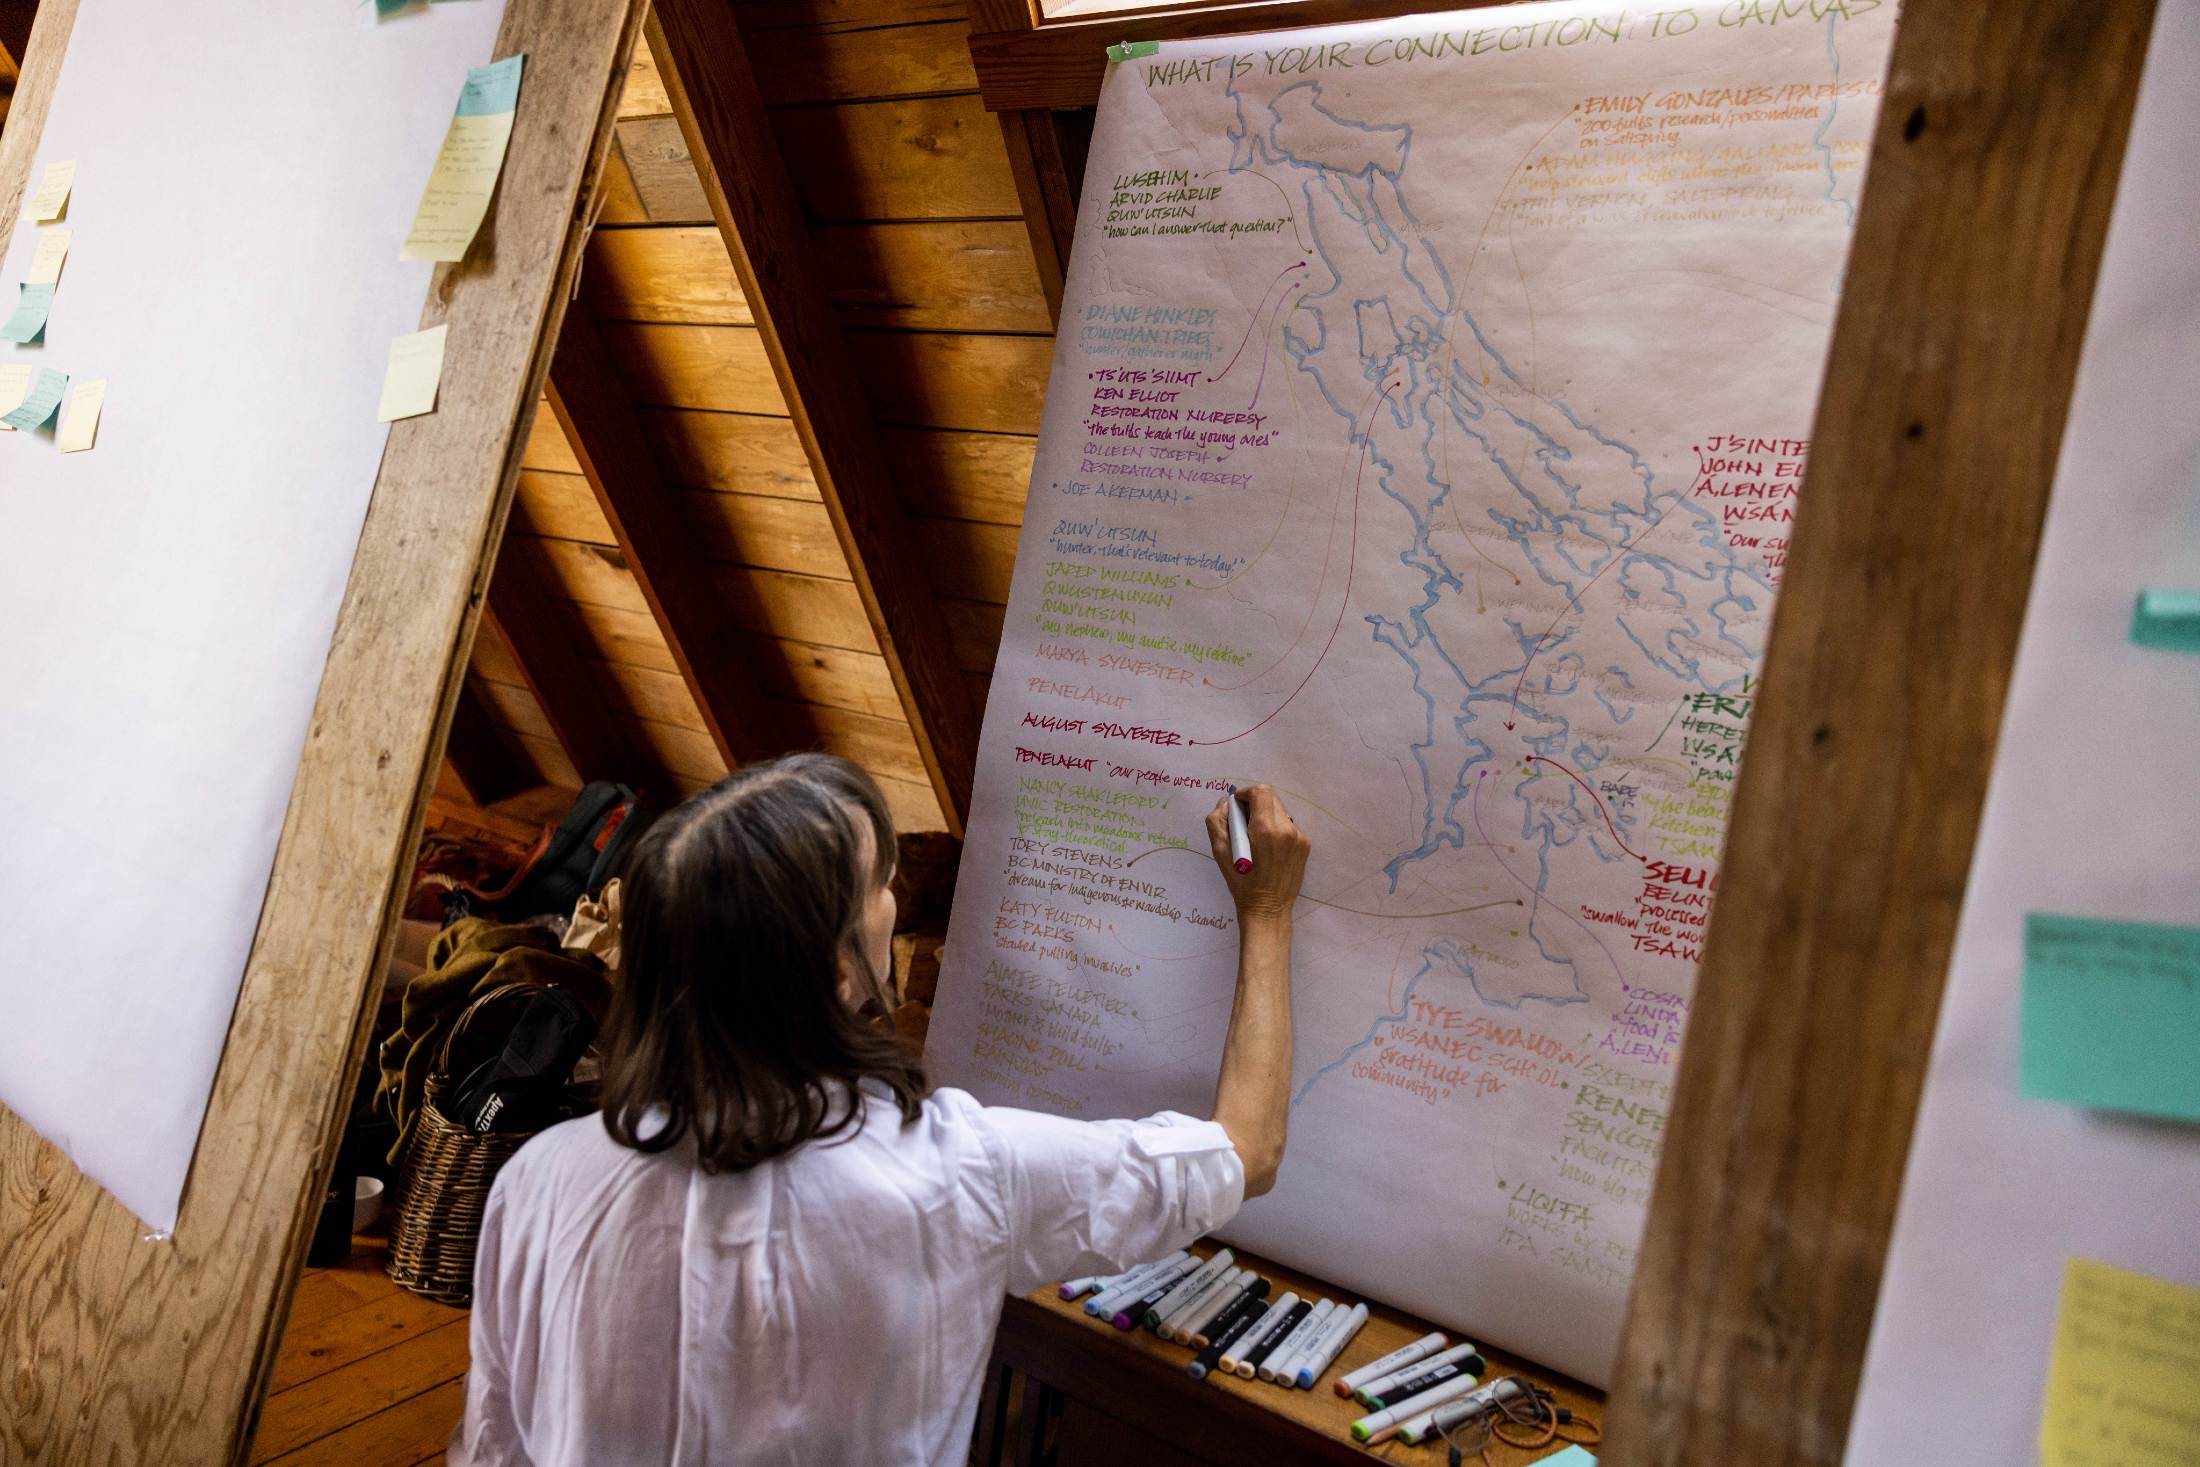 A person facing away from the camera, writing on a large piece of white paper with a hand-drawn map.